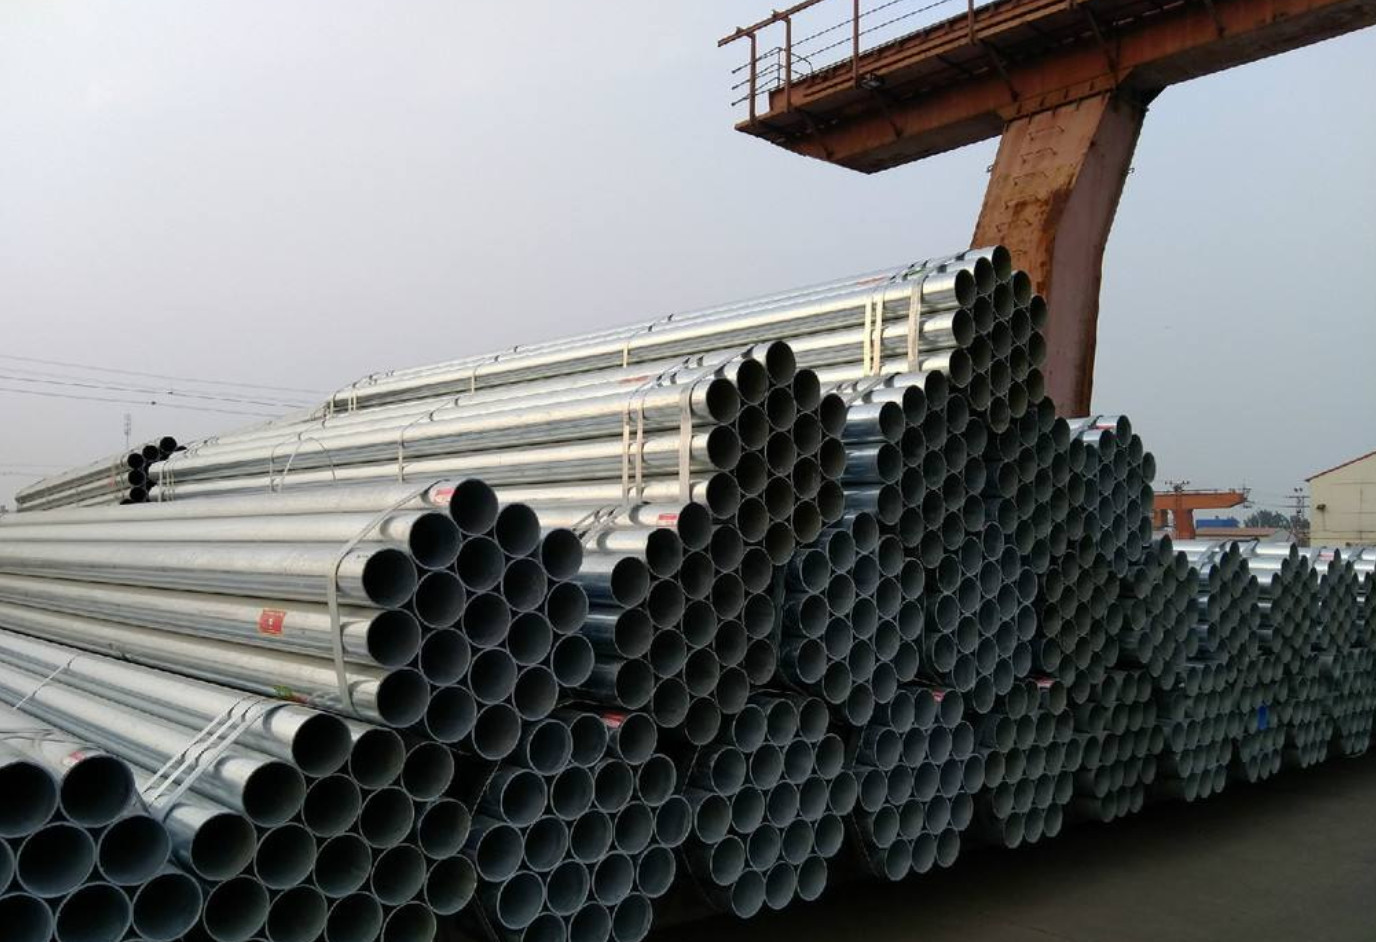 Buy cheap BS 1387/ ASTM A53 Hot dipped galvanized round steel pipe/GI Pre Galvanized Steel Pipe/galvanized seamless steel pipe product